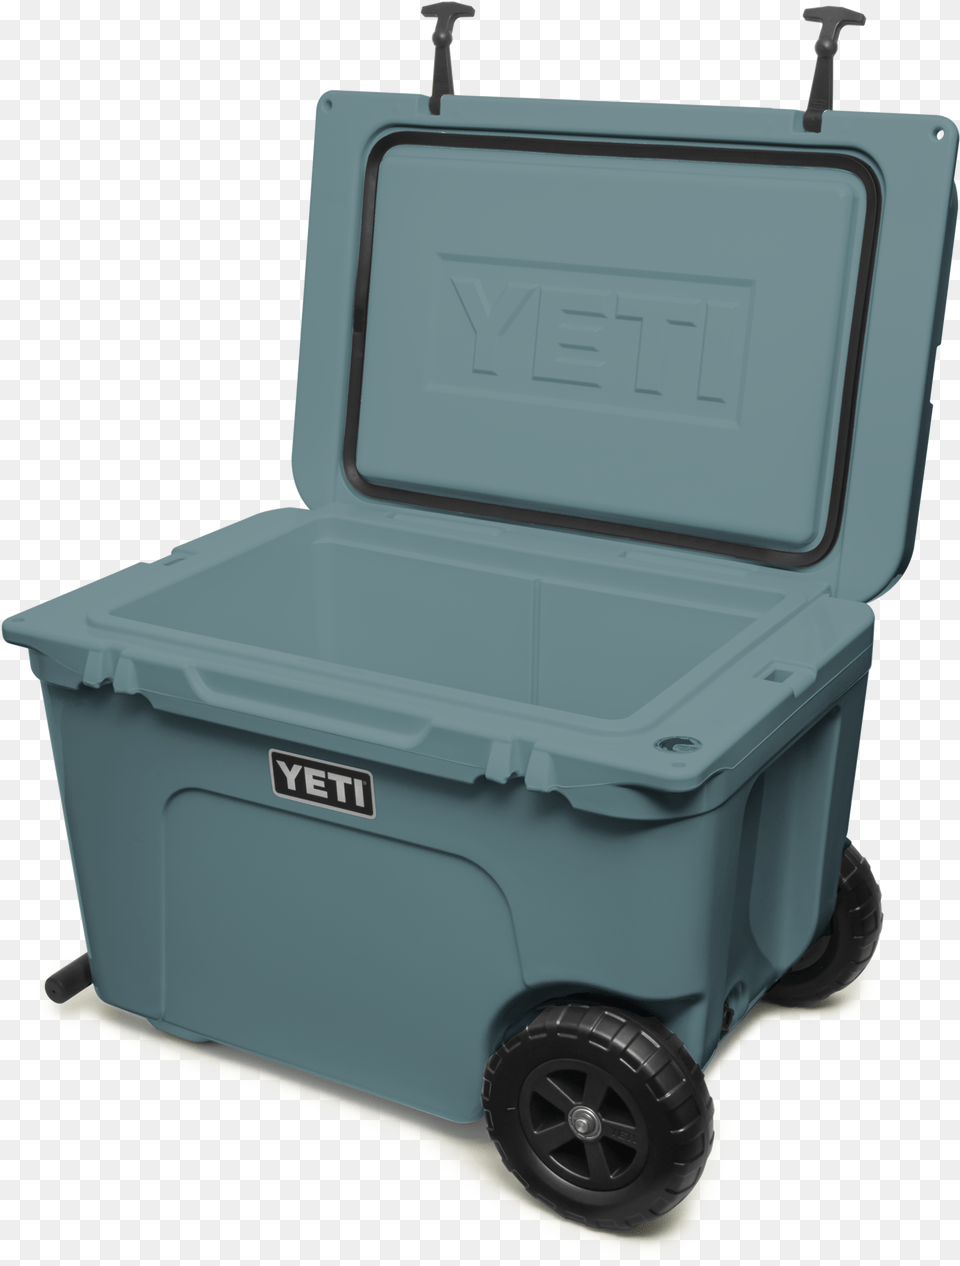 Tundra Haul River Green Coolerclass Lazyload Lazyload Yeti Tundra Haul River Green, Appliance, Cooler, Device, Electrical Device Png Image